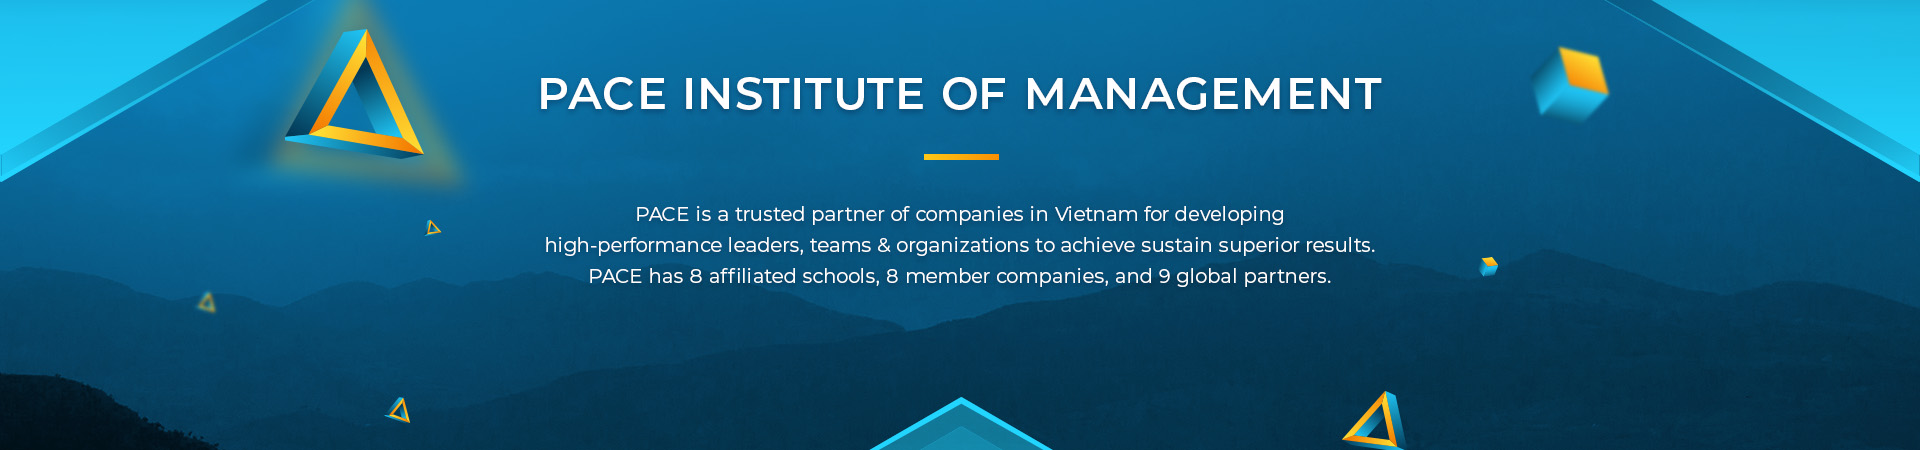 PACE’S 20-YEAR MILESTONES: A 2-DECADE JOURNEY OF DEVELOPING LEADERS & PROFESSIONALS FOR BUSINESS & SOCIETY IN VIETNAM